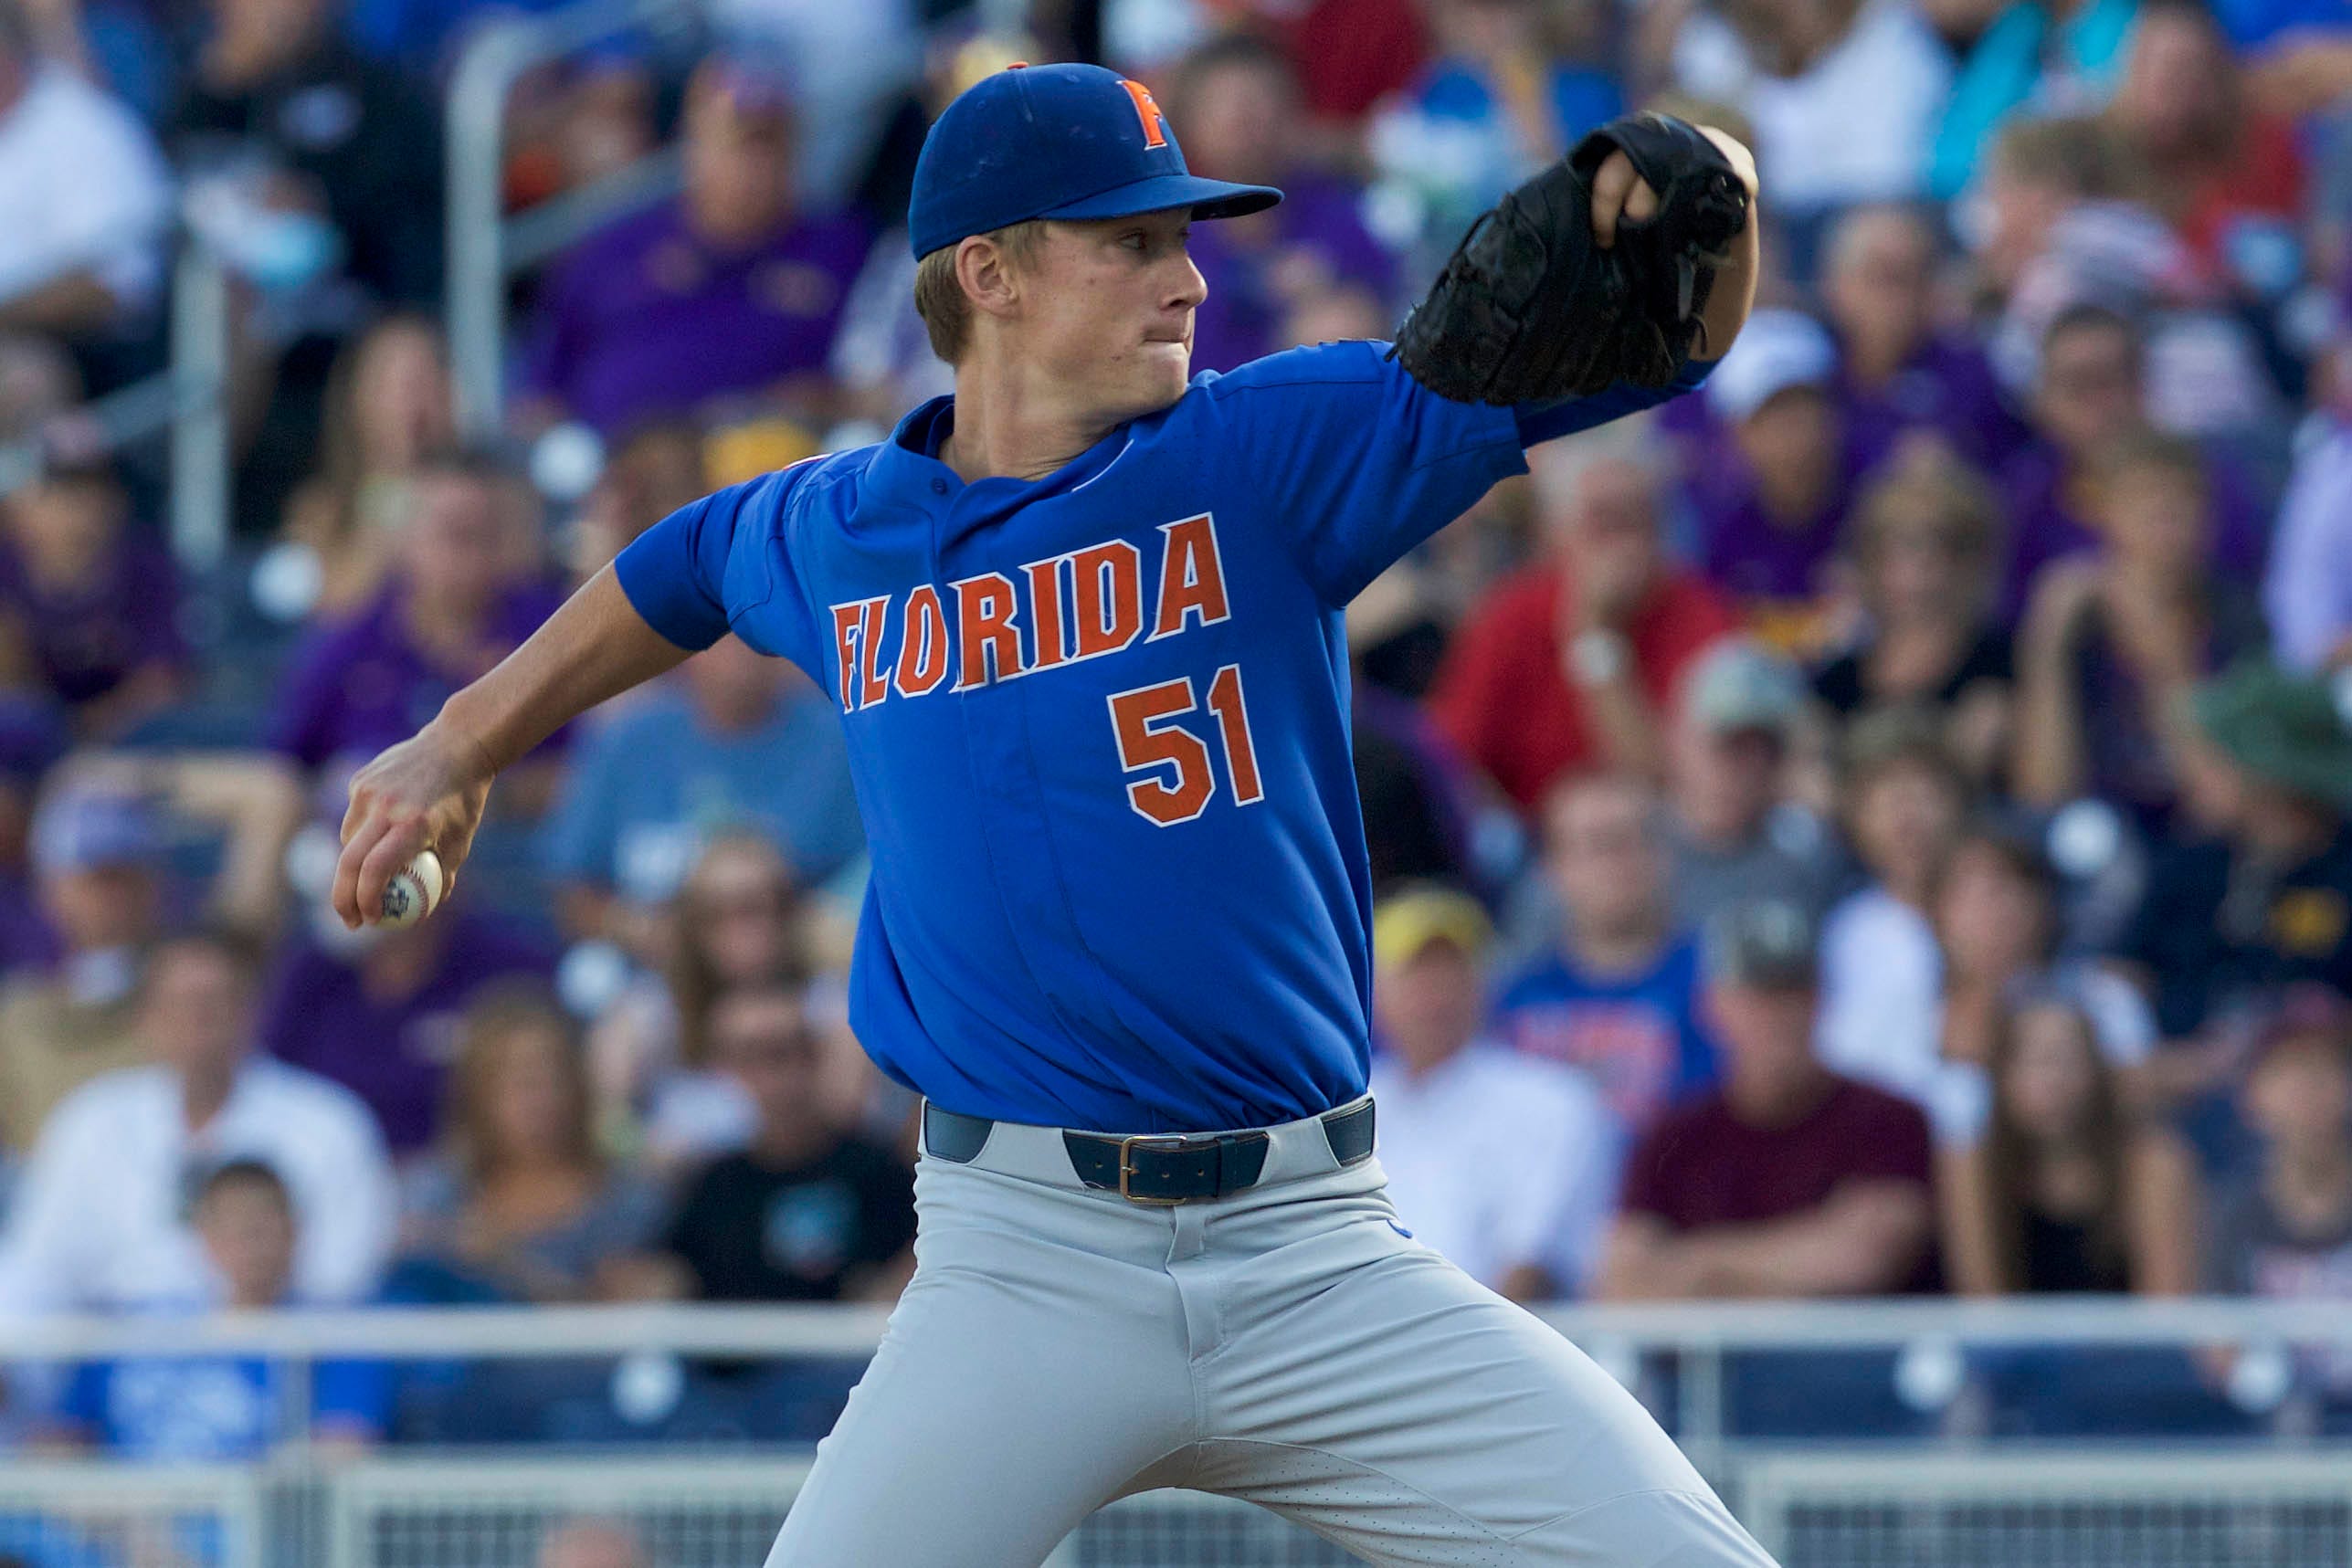 Jun 26, 2017; Omaha, NE, USA; Florida Gators pitcher Brady Singer (51) throws against the LSU Tigers in the first inning in game one of the championship series of the 2017 College World Series at TD Ameritrade Park Omaha. Mandatory Credit: Bruce Thorson-USA TODAY Sports ORG XMIT: USATSI-360331 ORIG FILE ID:  20170626_sal_st5_118.JPG